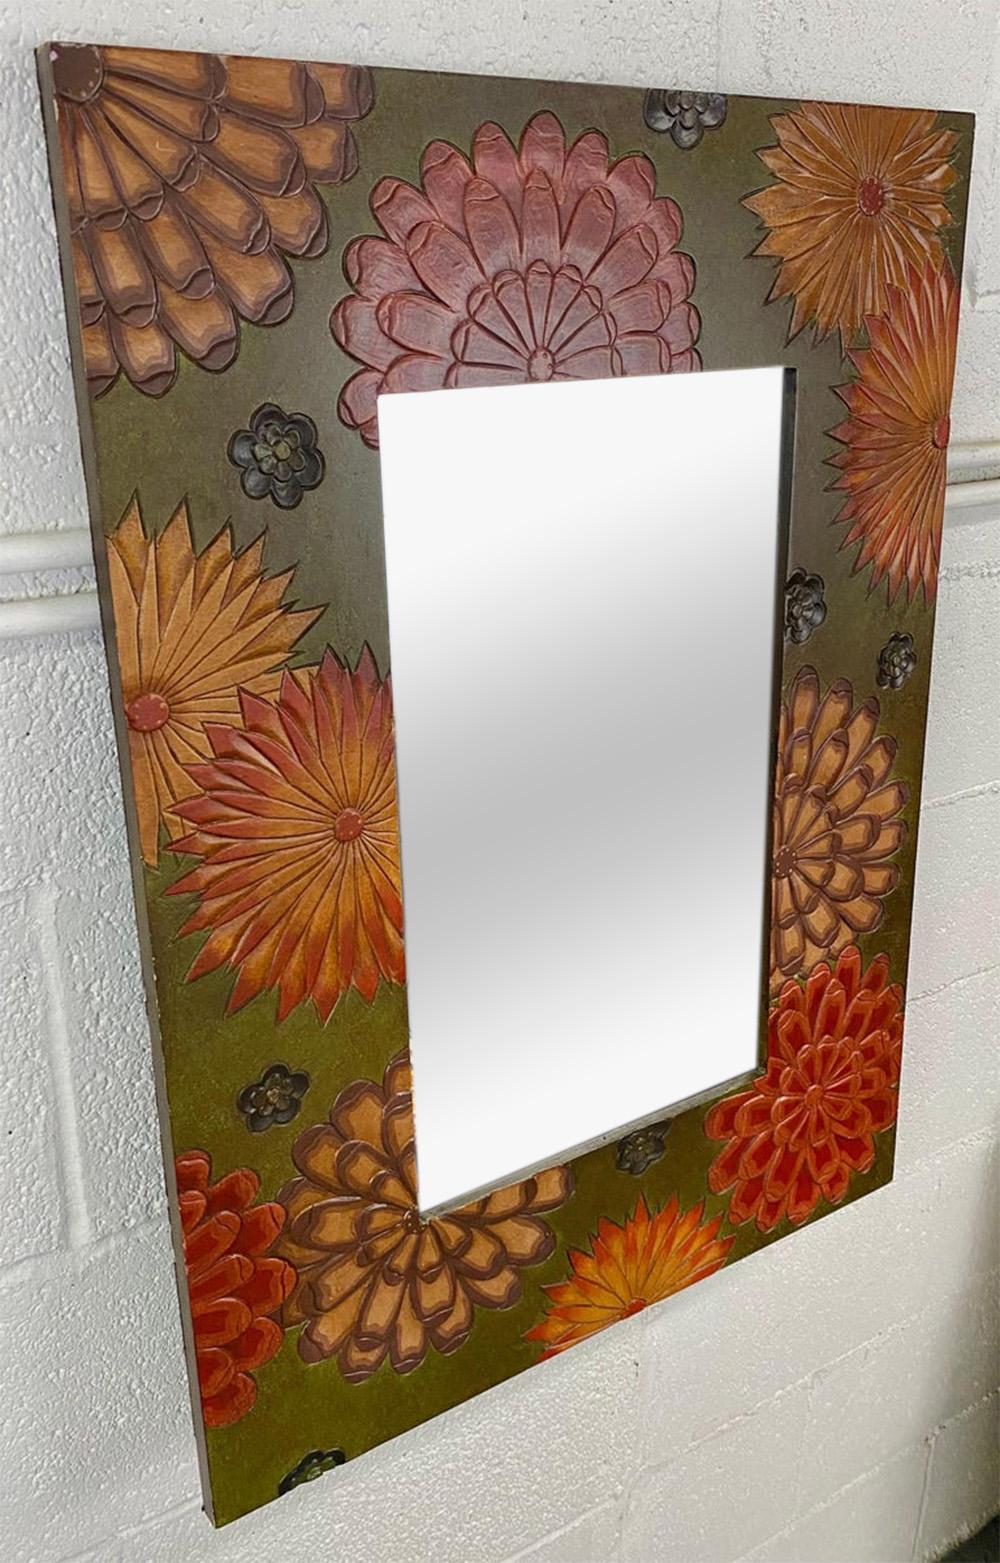 A beautiful Boho Chic wall or vanity  mirror. The stylish mirror is made of a hand carved frame featuring sun flowers motifs on a green background. The earthy color tone of the frame adds class and elegance to the minor.  the mirror will look